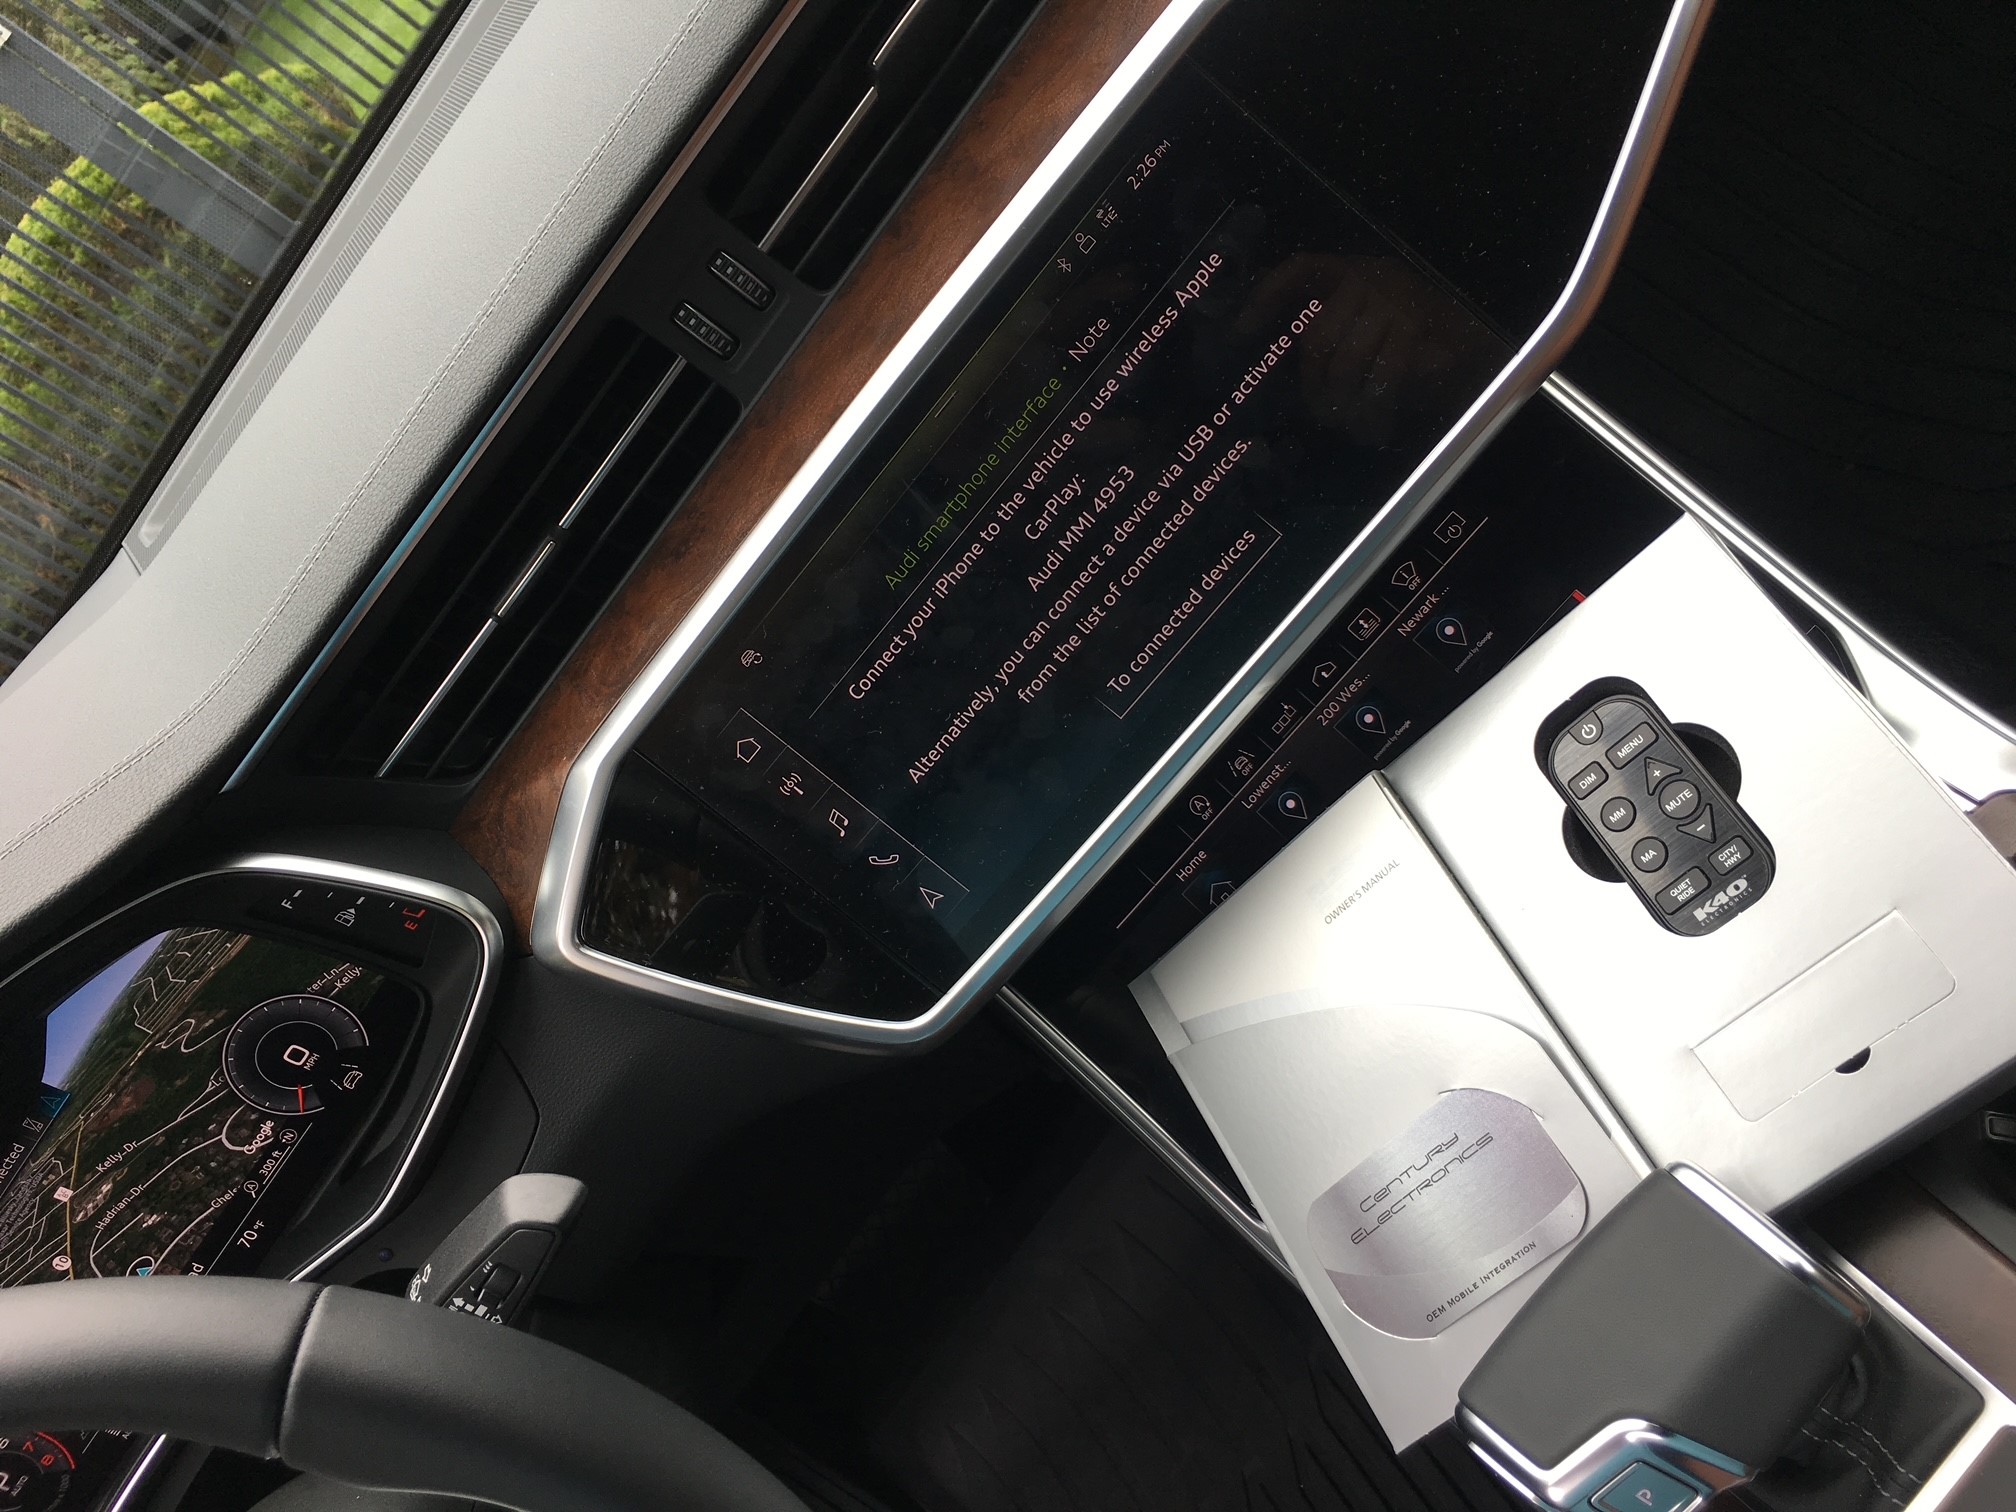 k40 radar detector and laser jammer presentation packet in an audi in new jersey